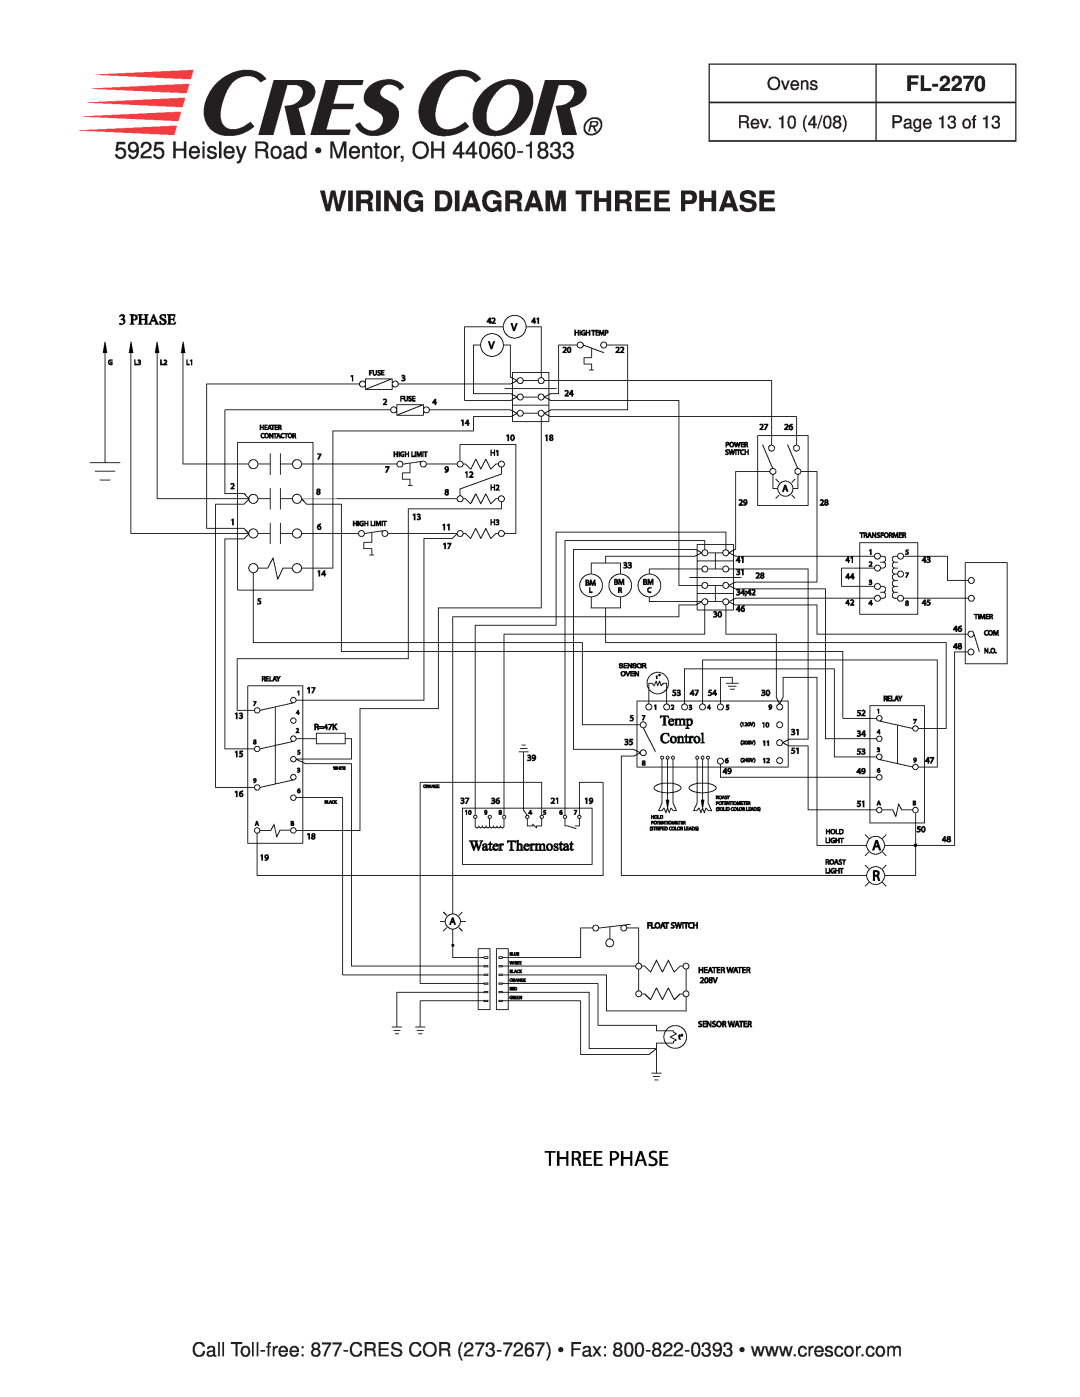 Cres Cor CO151FW1818B manual Wiring Diagram Three Phase, Heisley Road Mentor, OH, FL-2270, Temp, Water Thermostat, Control 